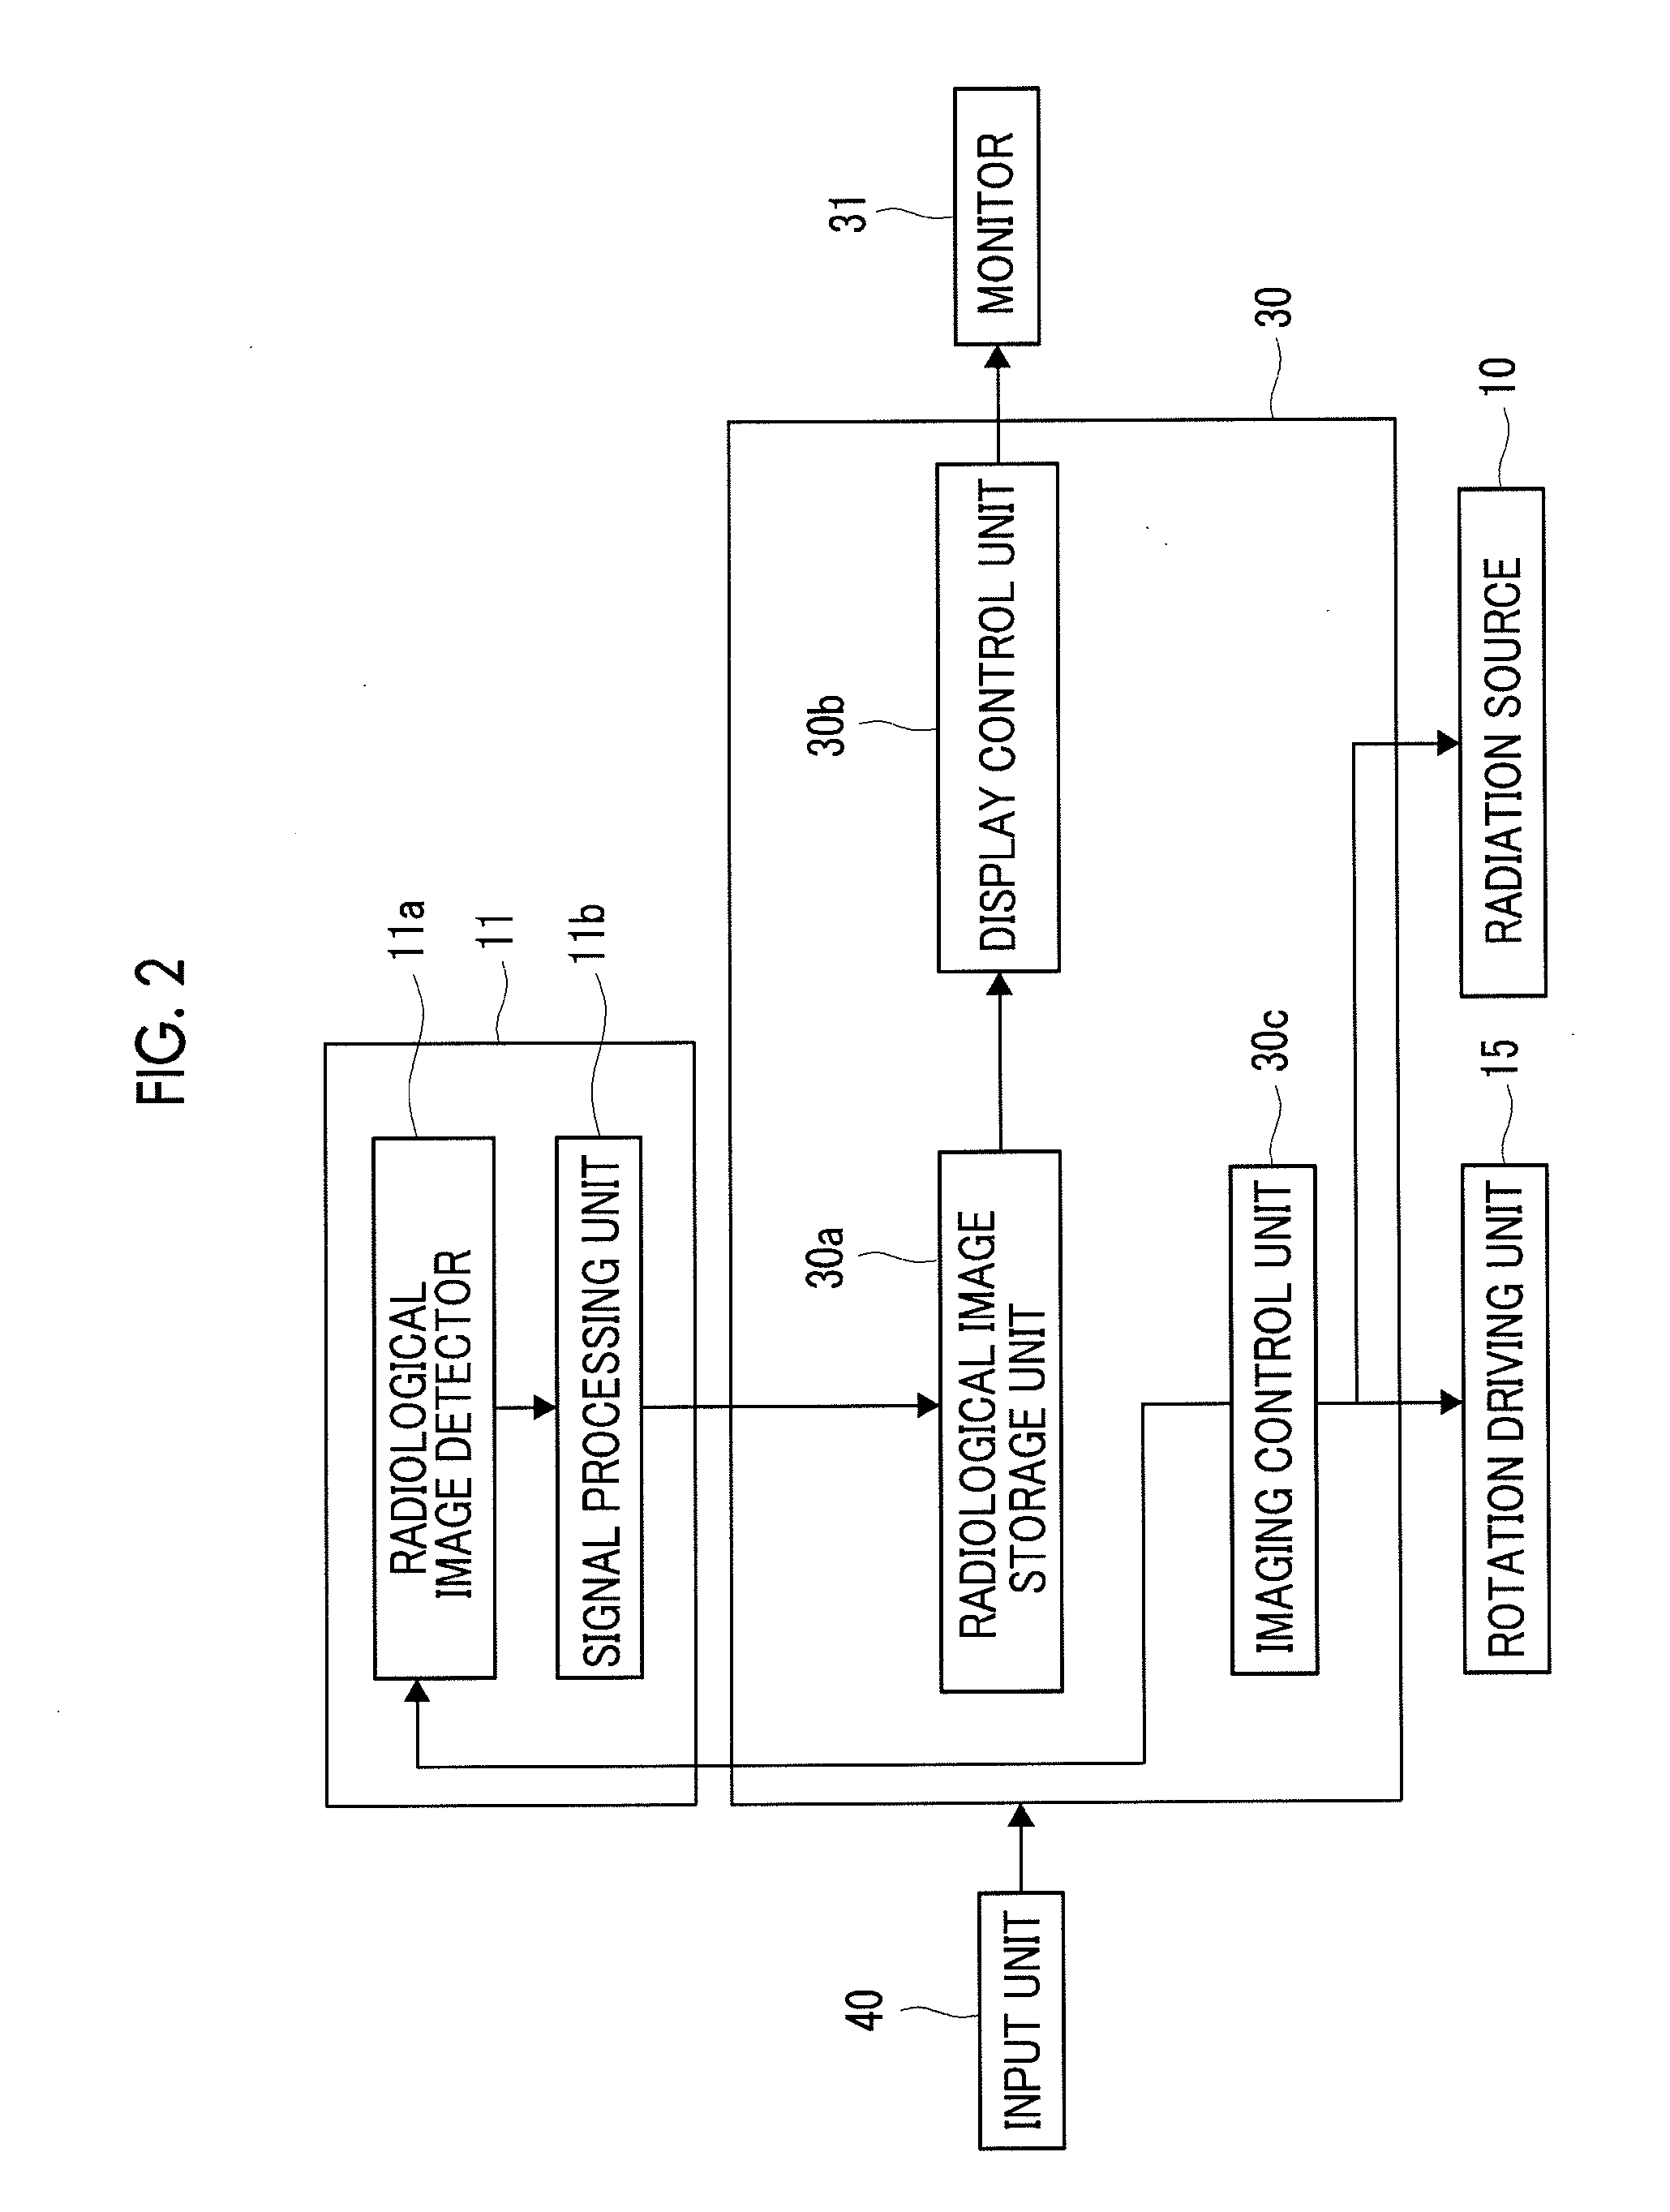 Stereoscopic image displaying method and device